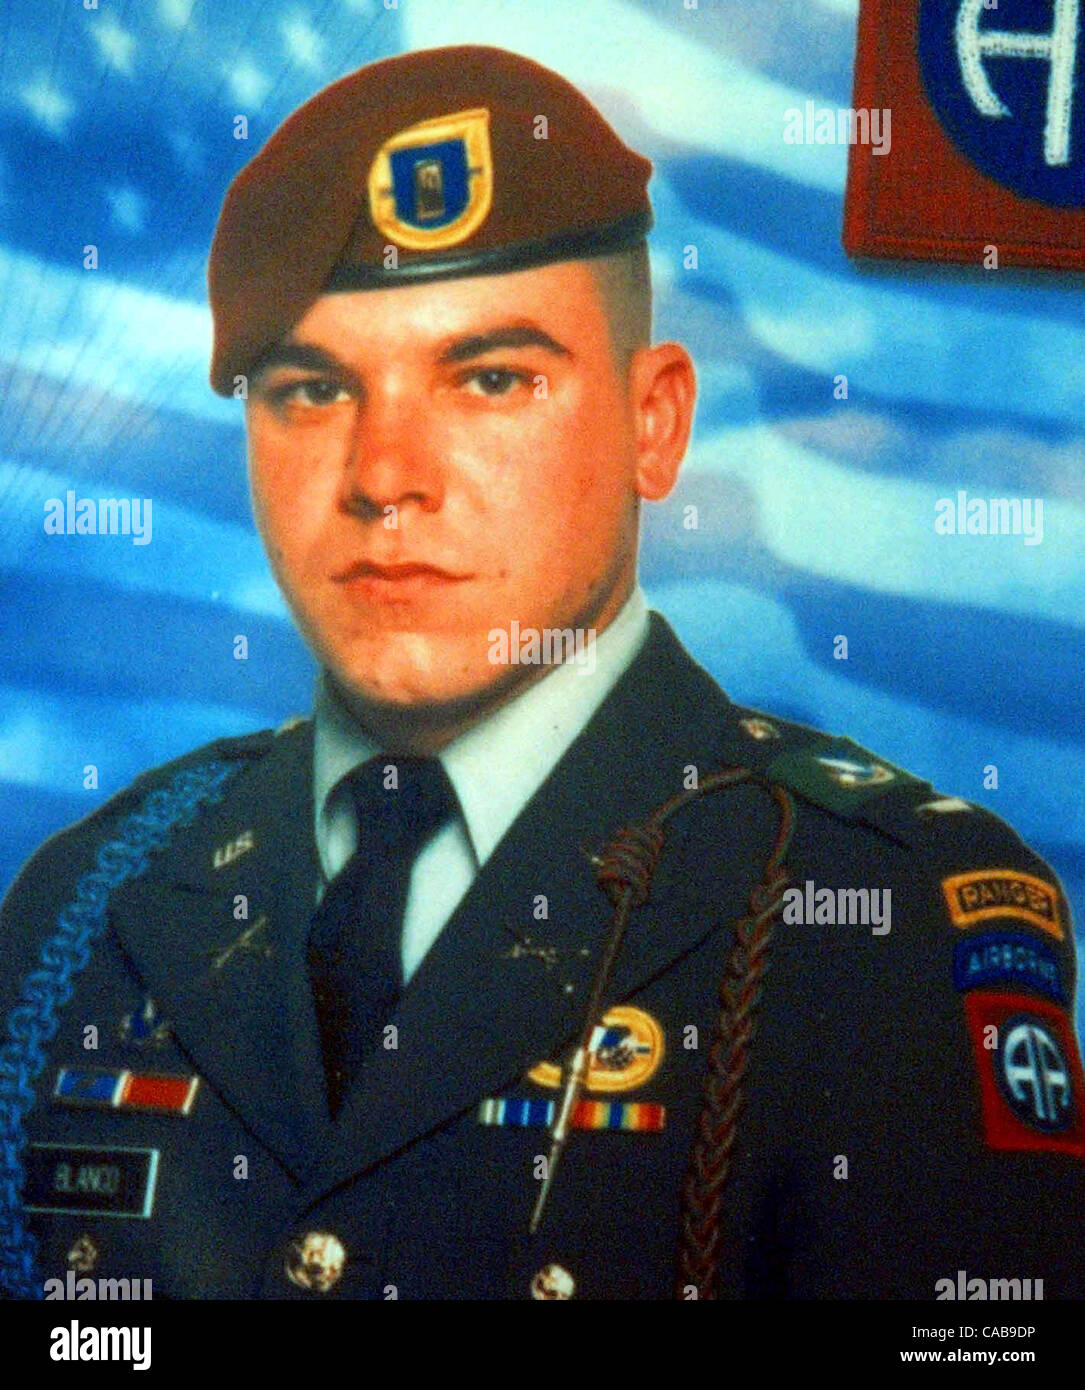 This is a copy photo of  Captain Ernesto Blanco of San Antonio who was killed in Iraq on December 28, 2003. He was an infantry officer with the 82nd Airborne. JOHN DAVENPORT / STAFF Stock Photo